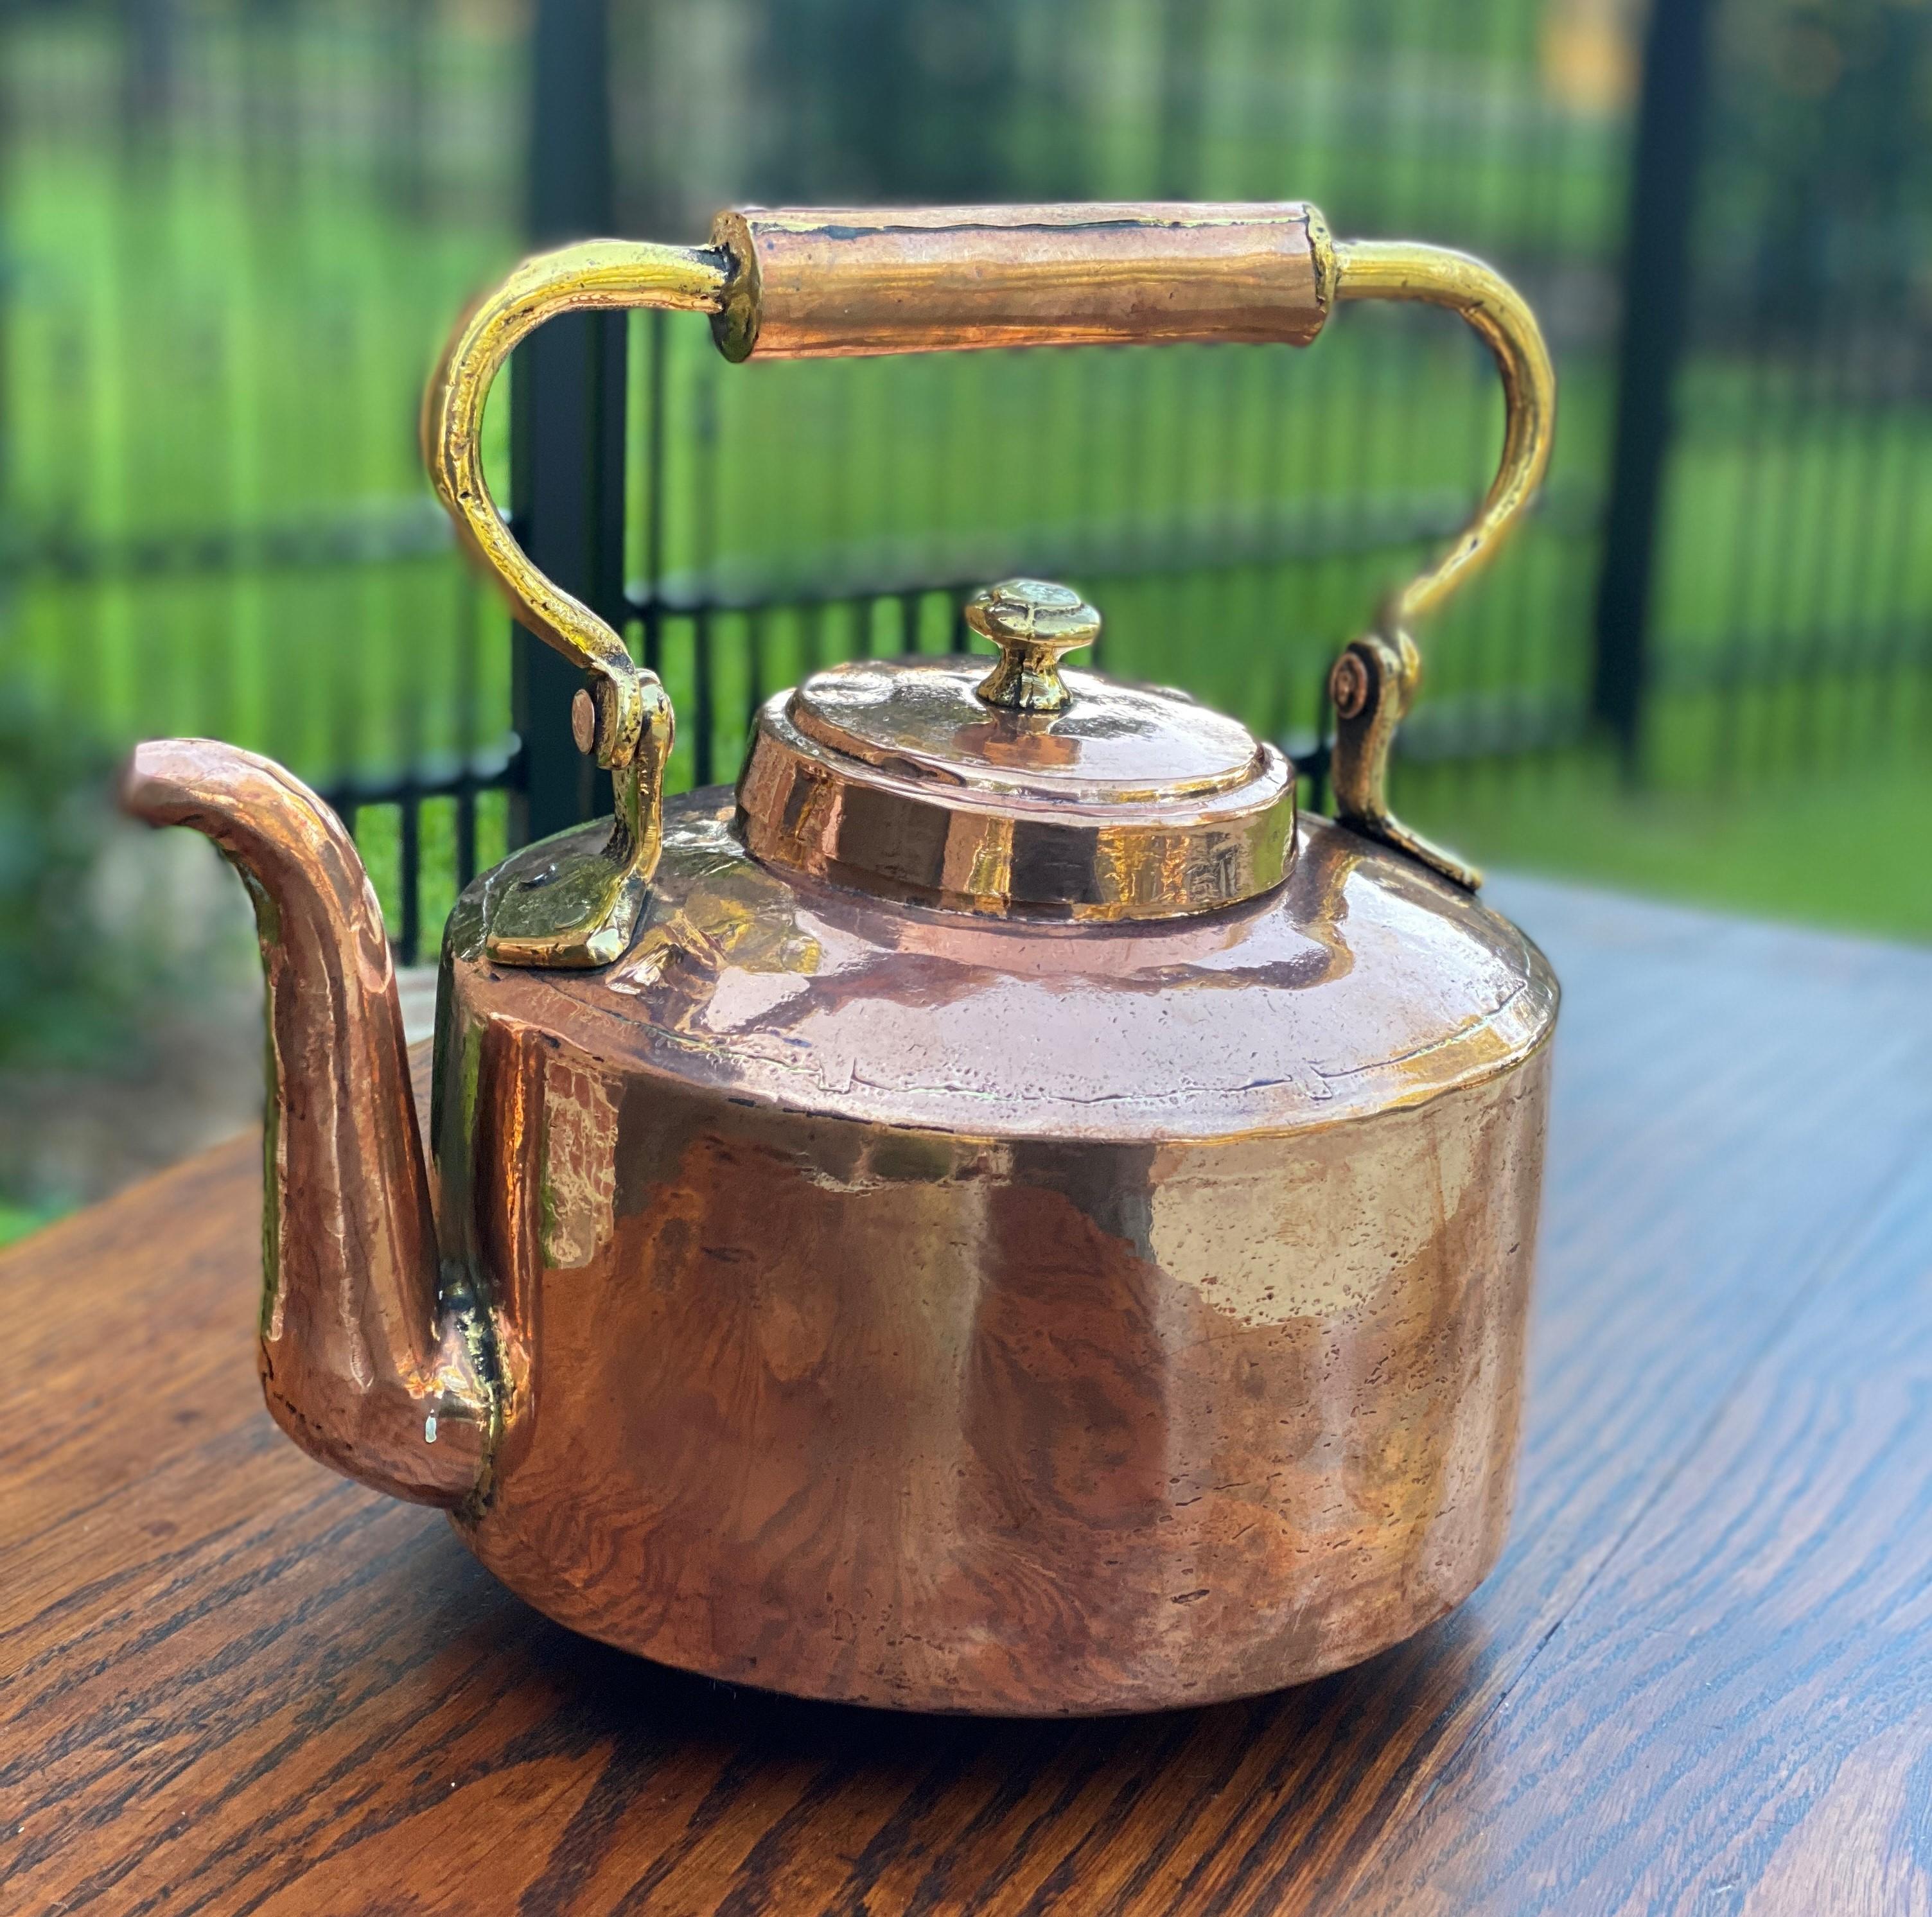 Charming antique English copper & brass tea kettle~~hand-seamed~~c. 1900 
Excellent copper kettle with lid~~handle is brass

Measures: 9